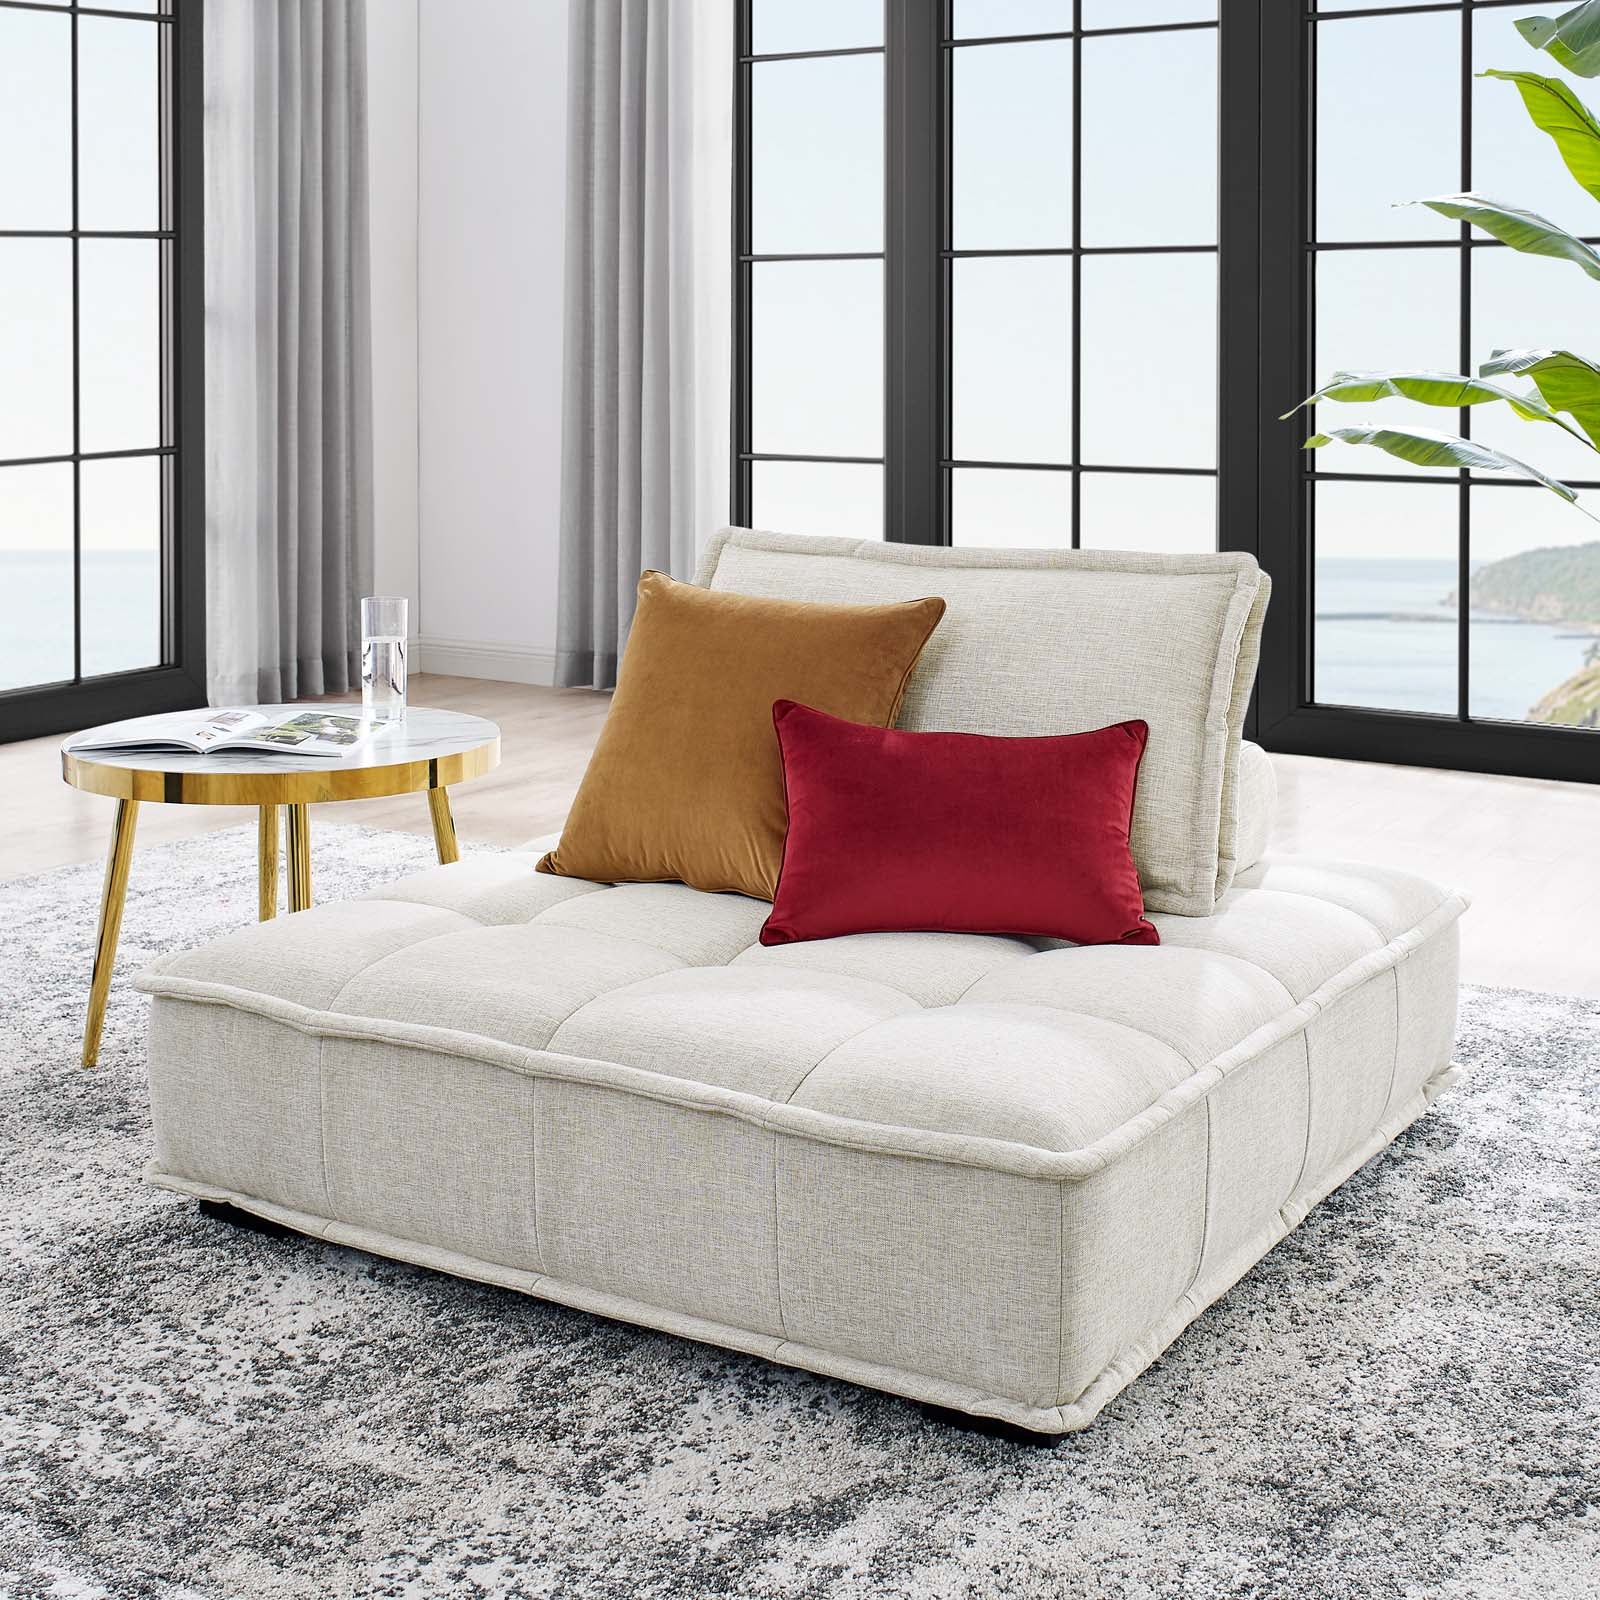 Saunter Tufted Fabric Armless Chair - East Shore Modern Home Furnishings